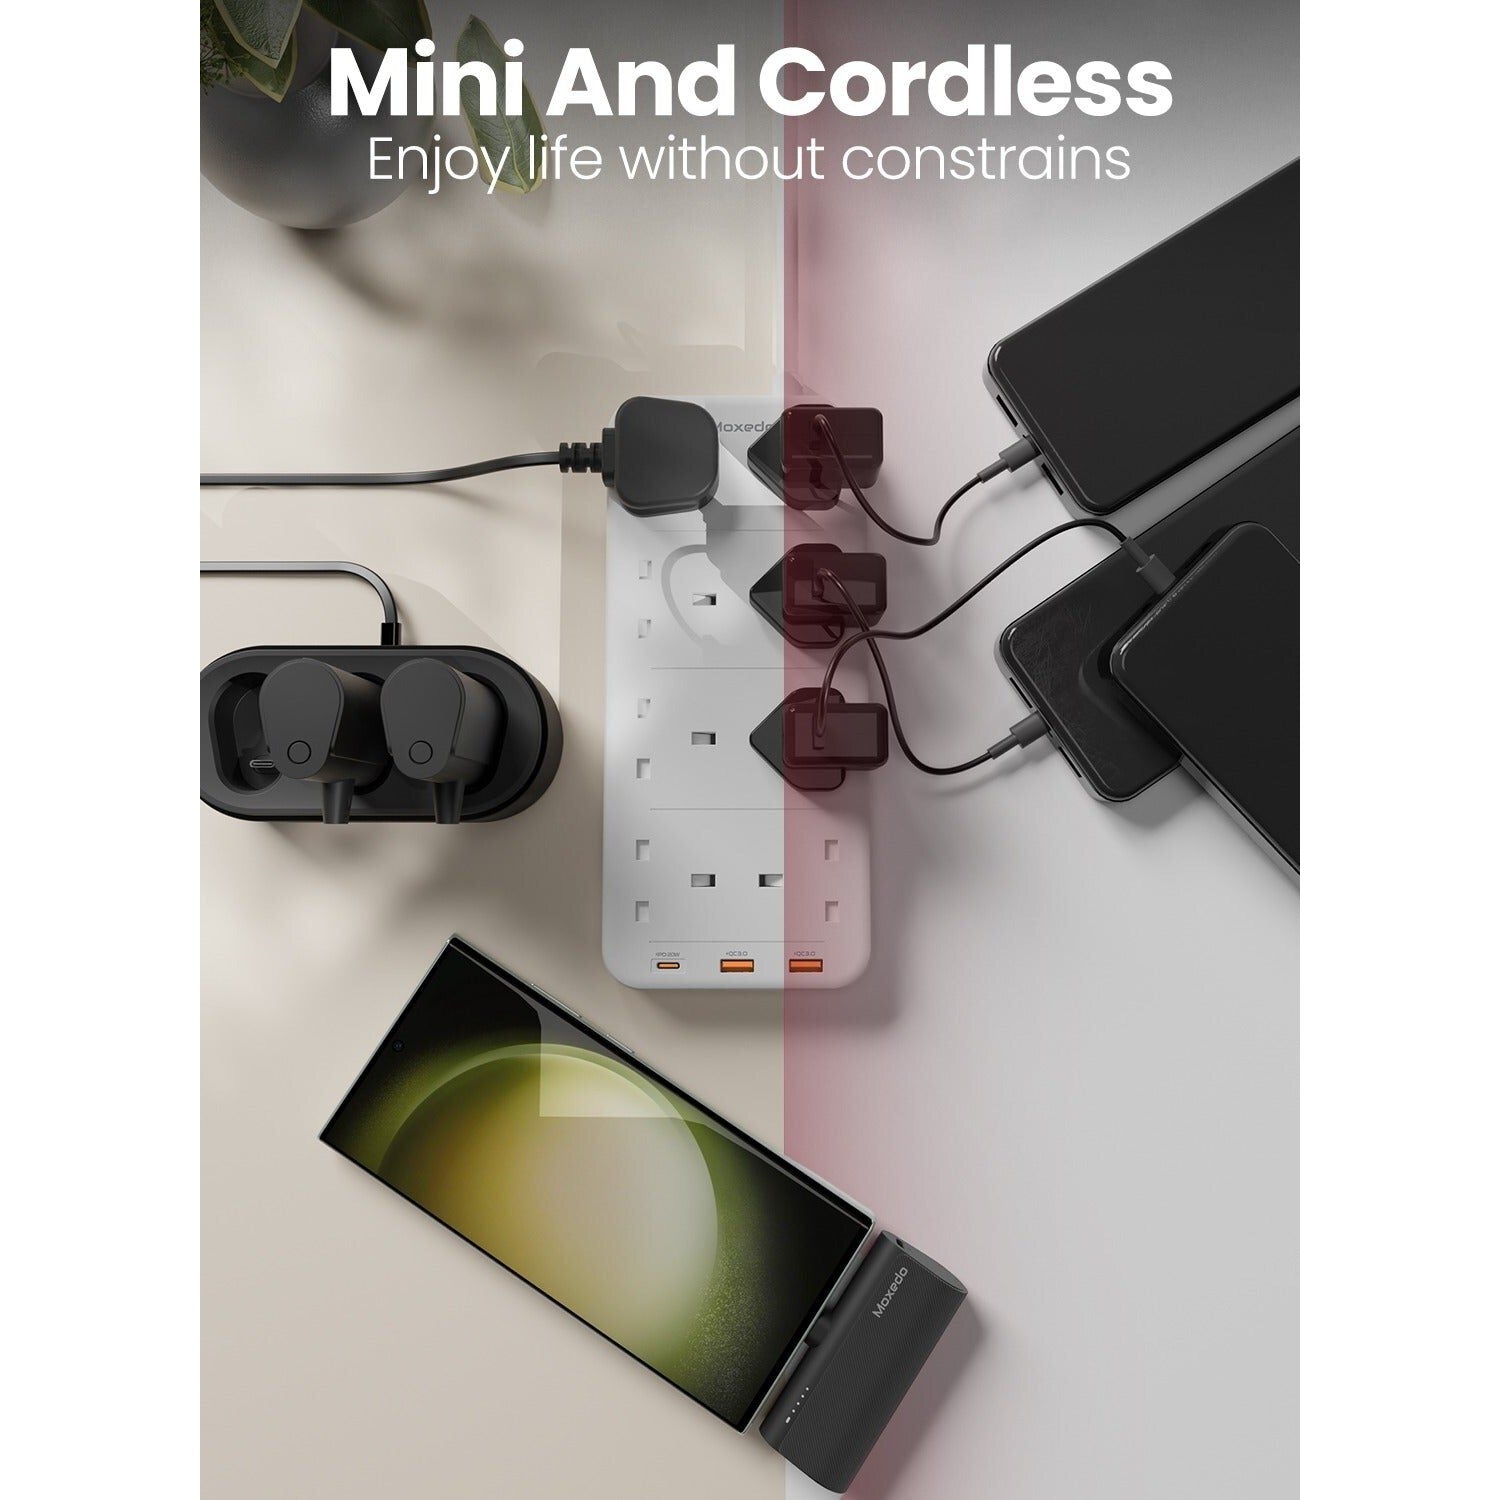 cordless powerbank is connected with a mobile by using Moxedo 3 in 1 3x 5000 mAh USB‐C Connector Power Bank